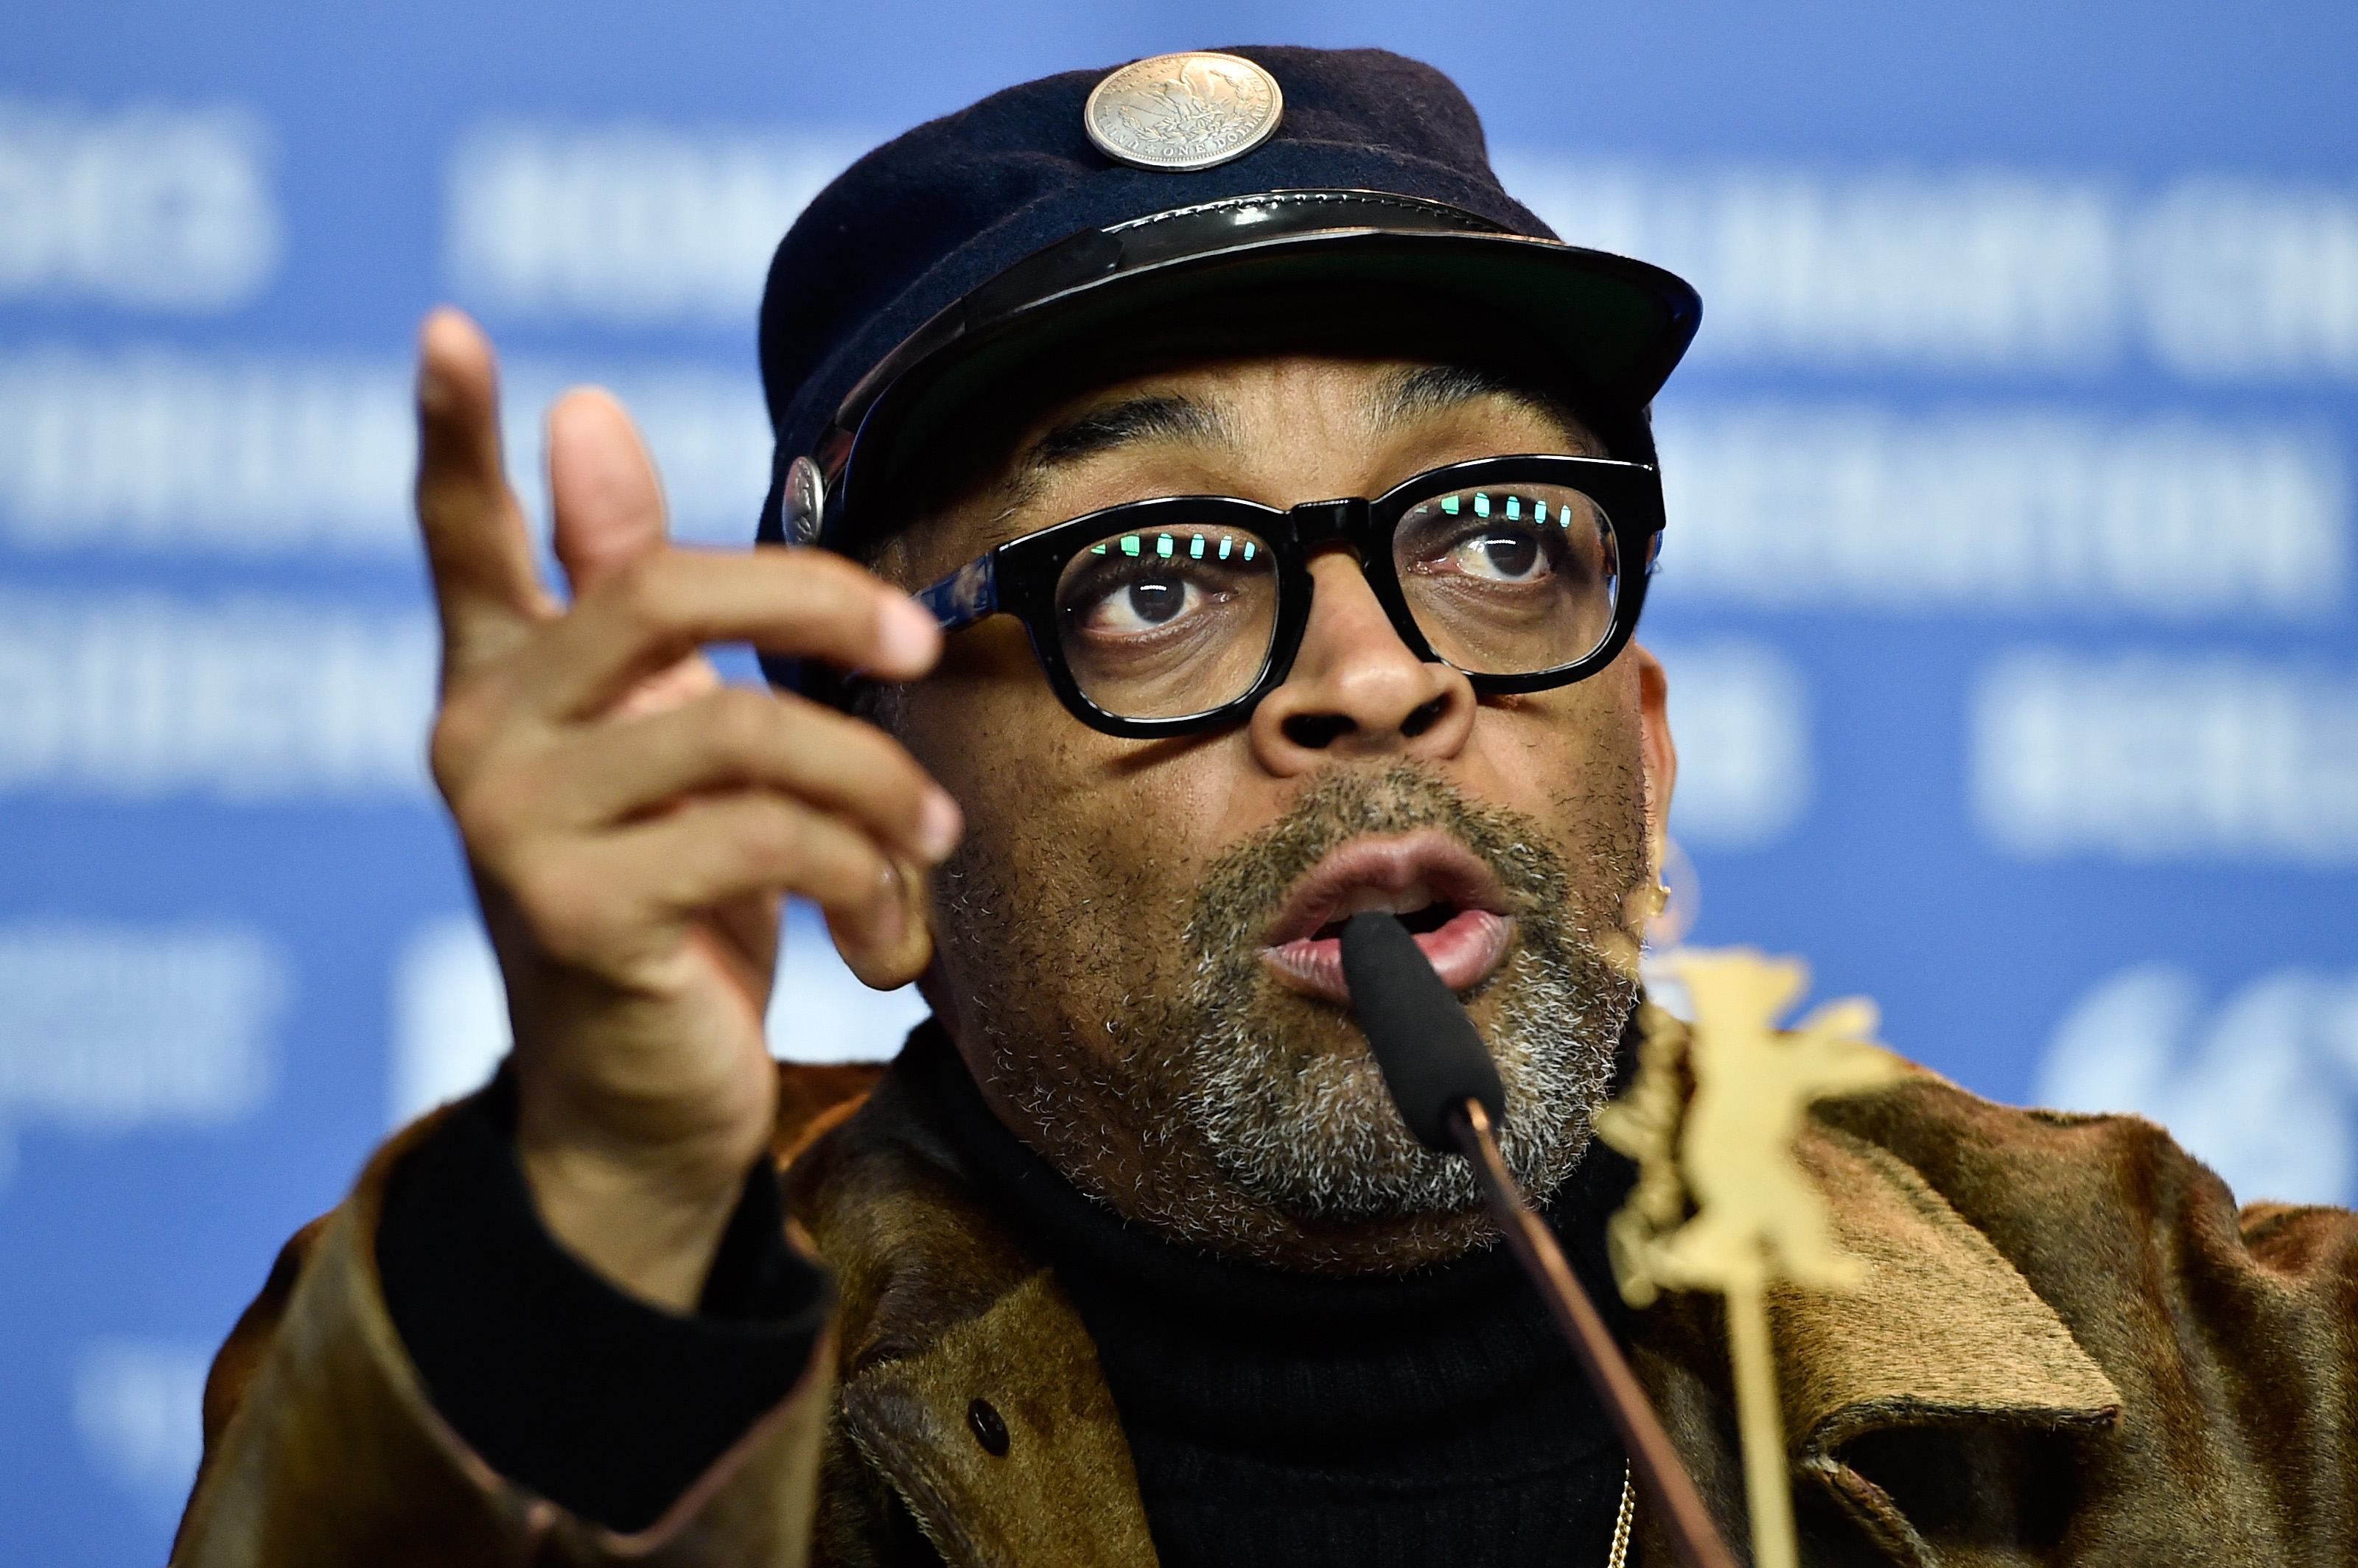 Director Spike Lee attends the 'Chi-Raq' press conference during the 66th Berlinale International Film Festival Berlin at Grand Hyatt Hotel on Feb. 16, in Berlin, Germany. (Pascal Le Segretain/Getty Images)